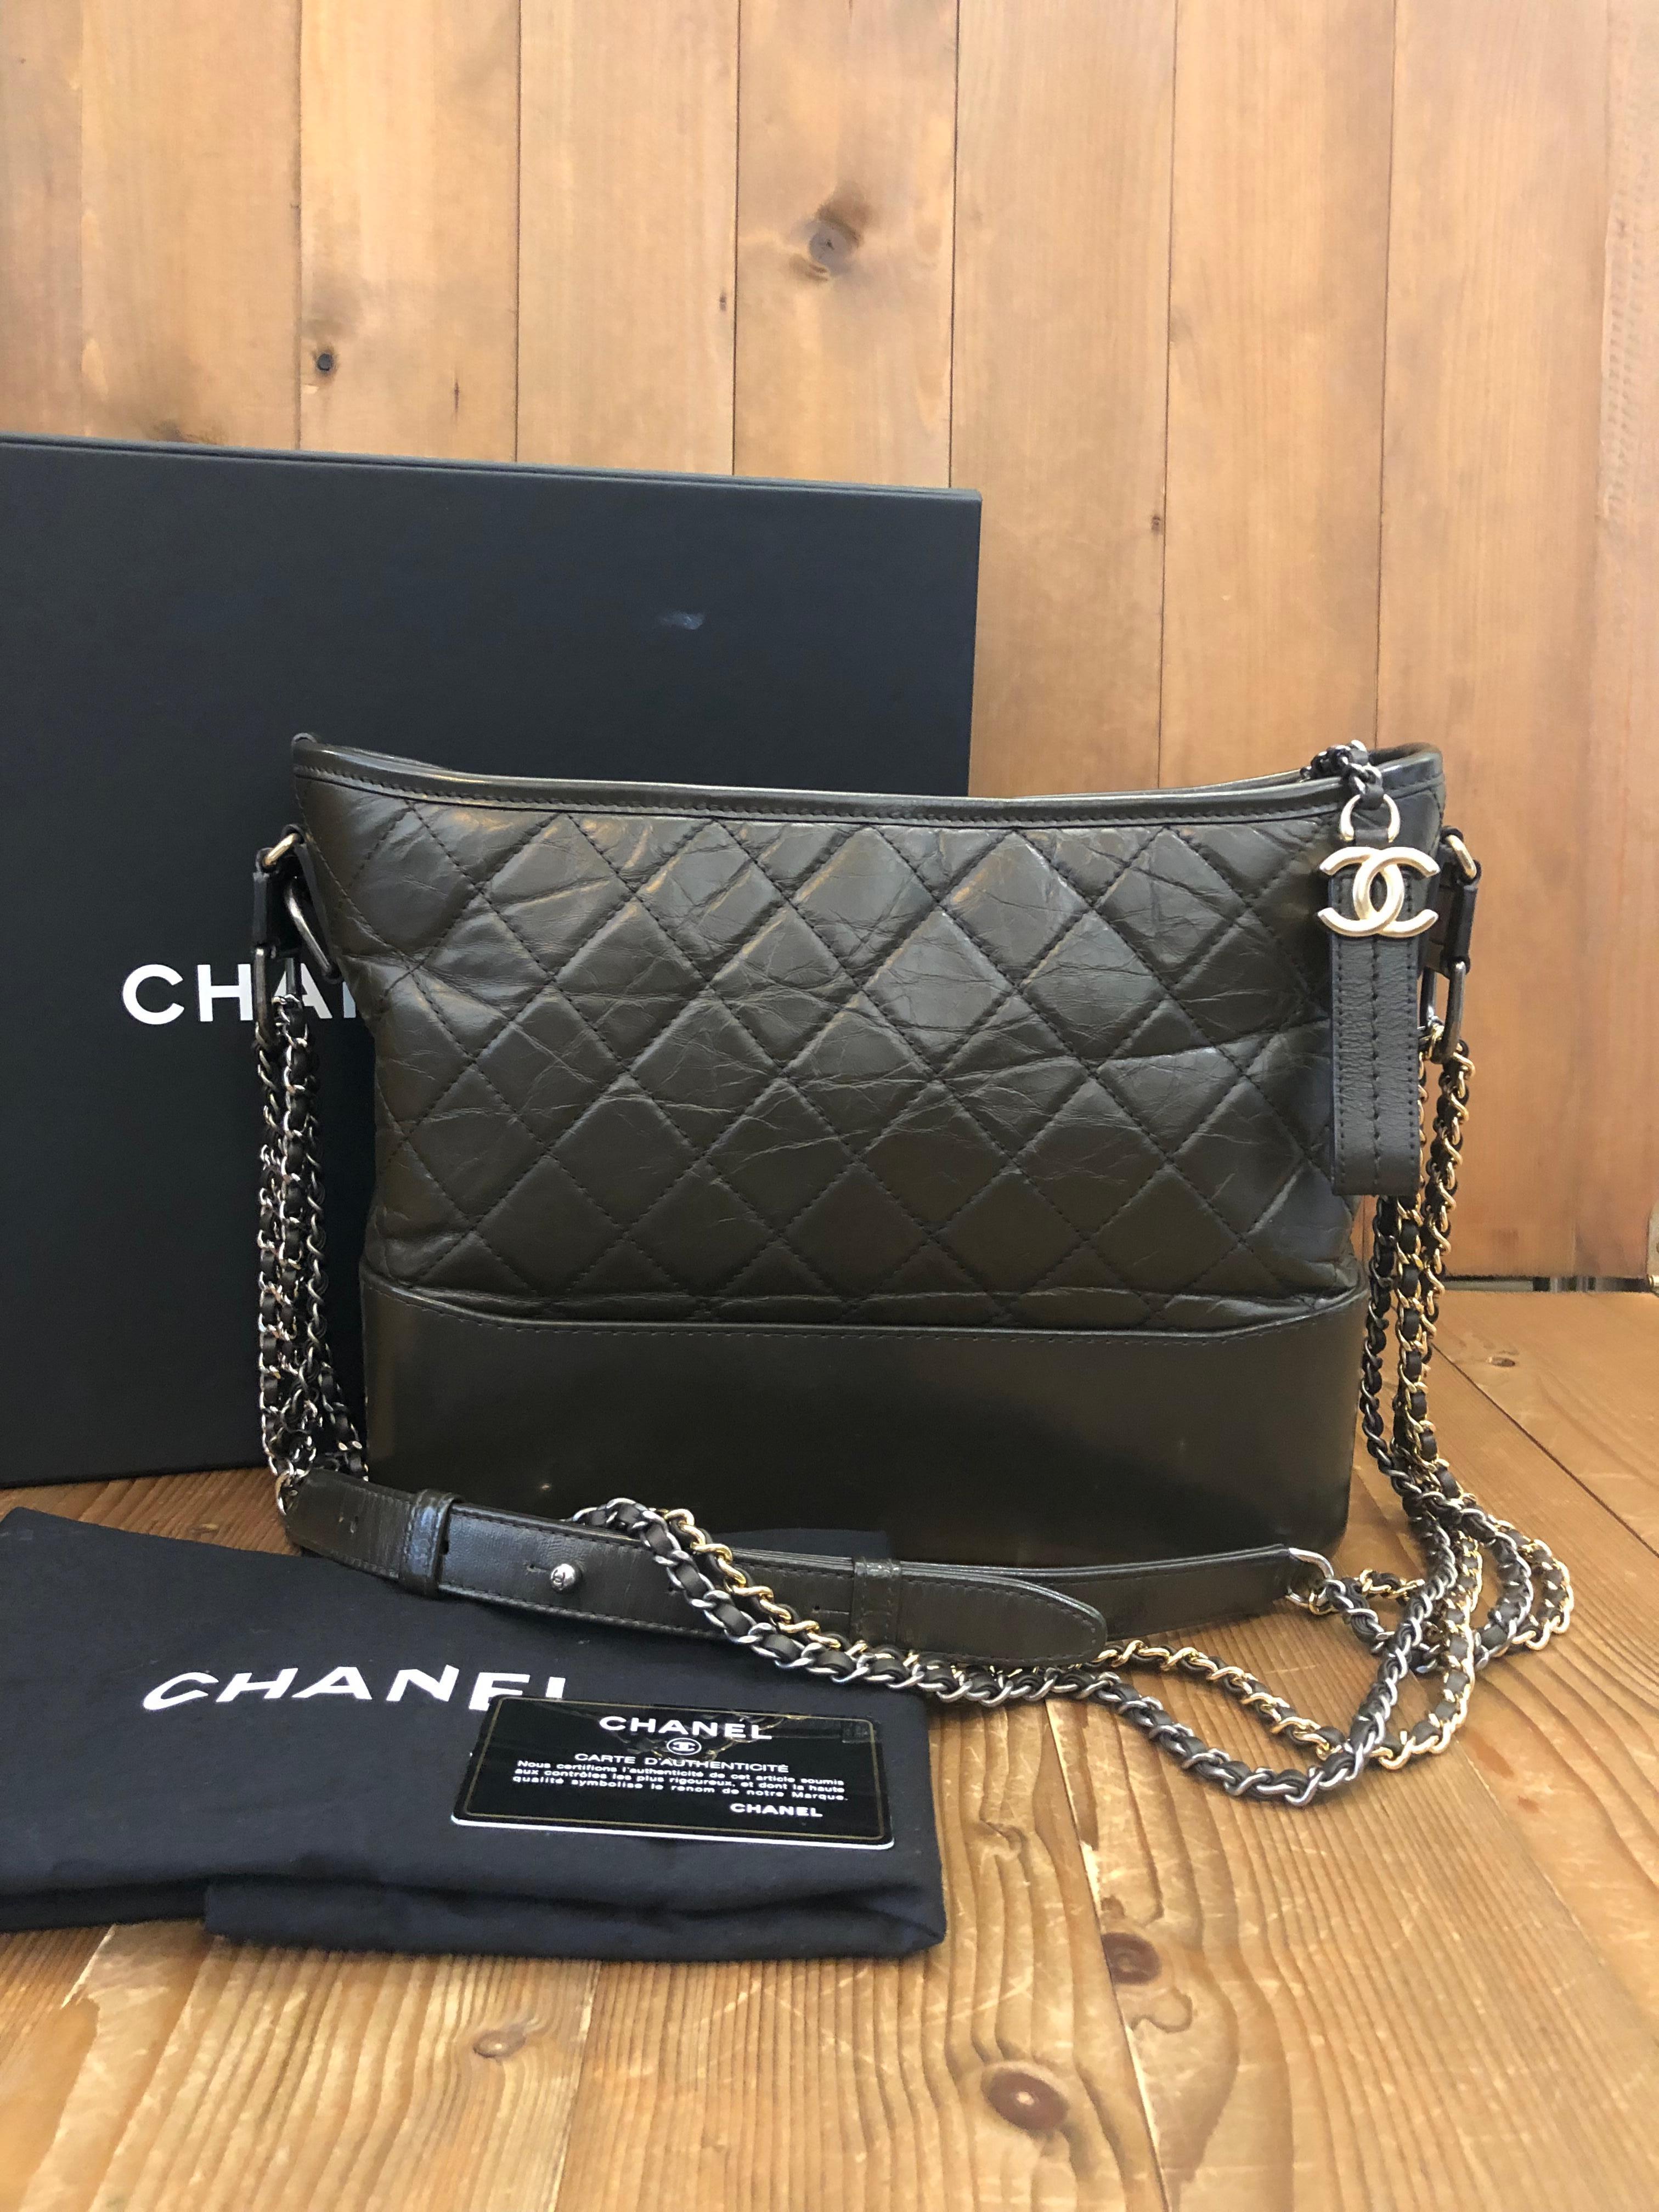 This 2019 CHANEL Gabrielle hobo bag is crafted of distressed calfskin leather in dark green featuring one interior zip pocket and two interior open pockets. Medium in size. Duel toned shoulder chains interlaced with the same leather. Made in Italy.